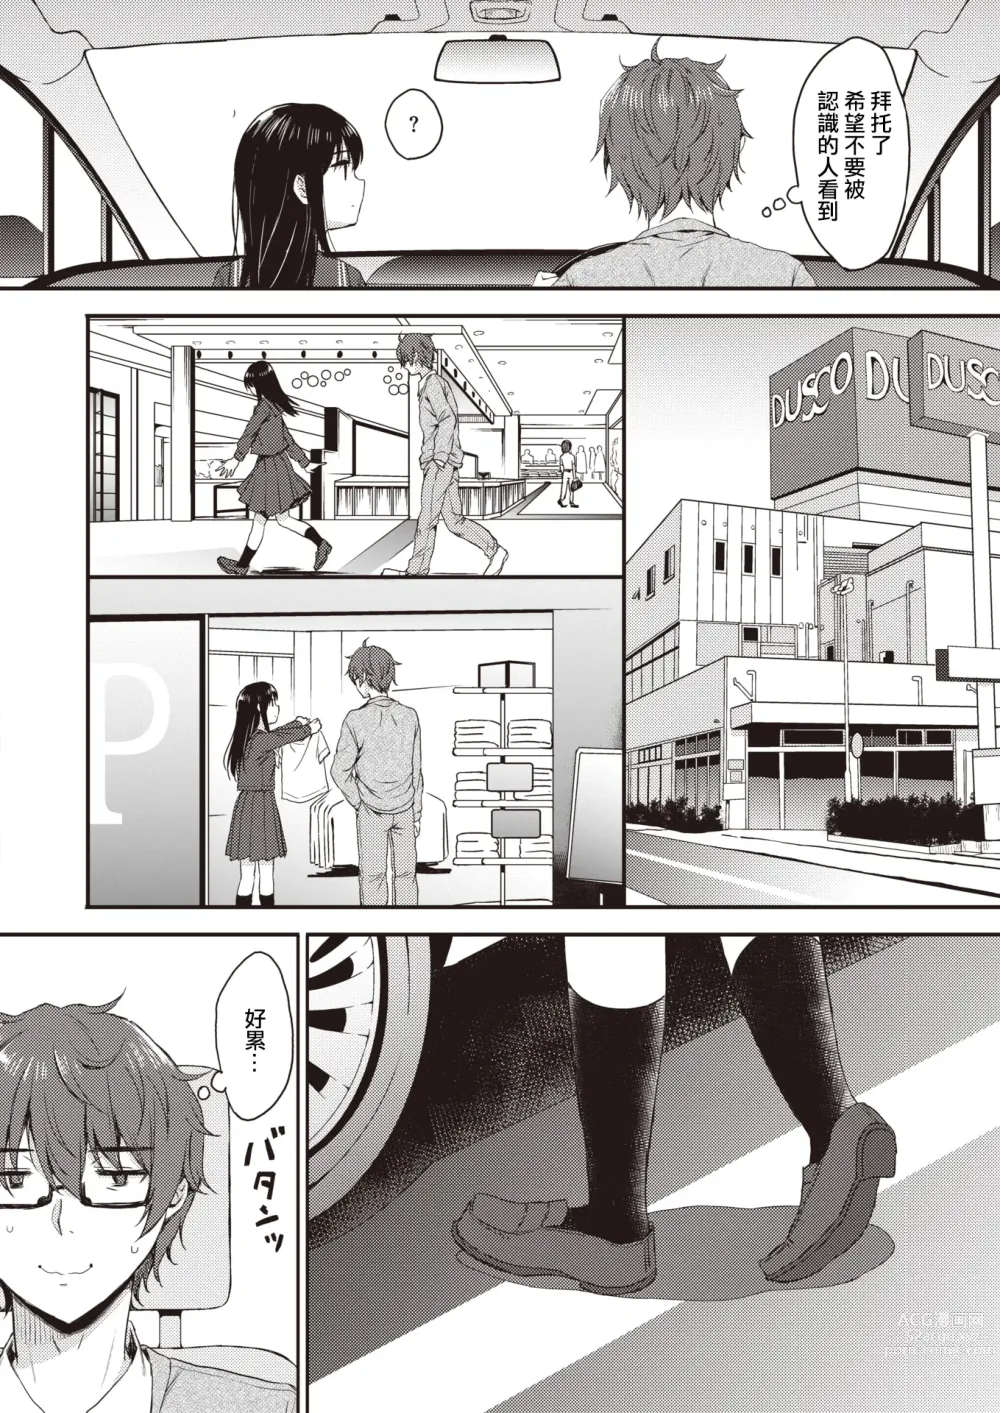 Page 2 of manga Blue Daisy ~Another~